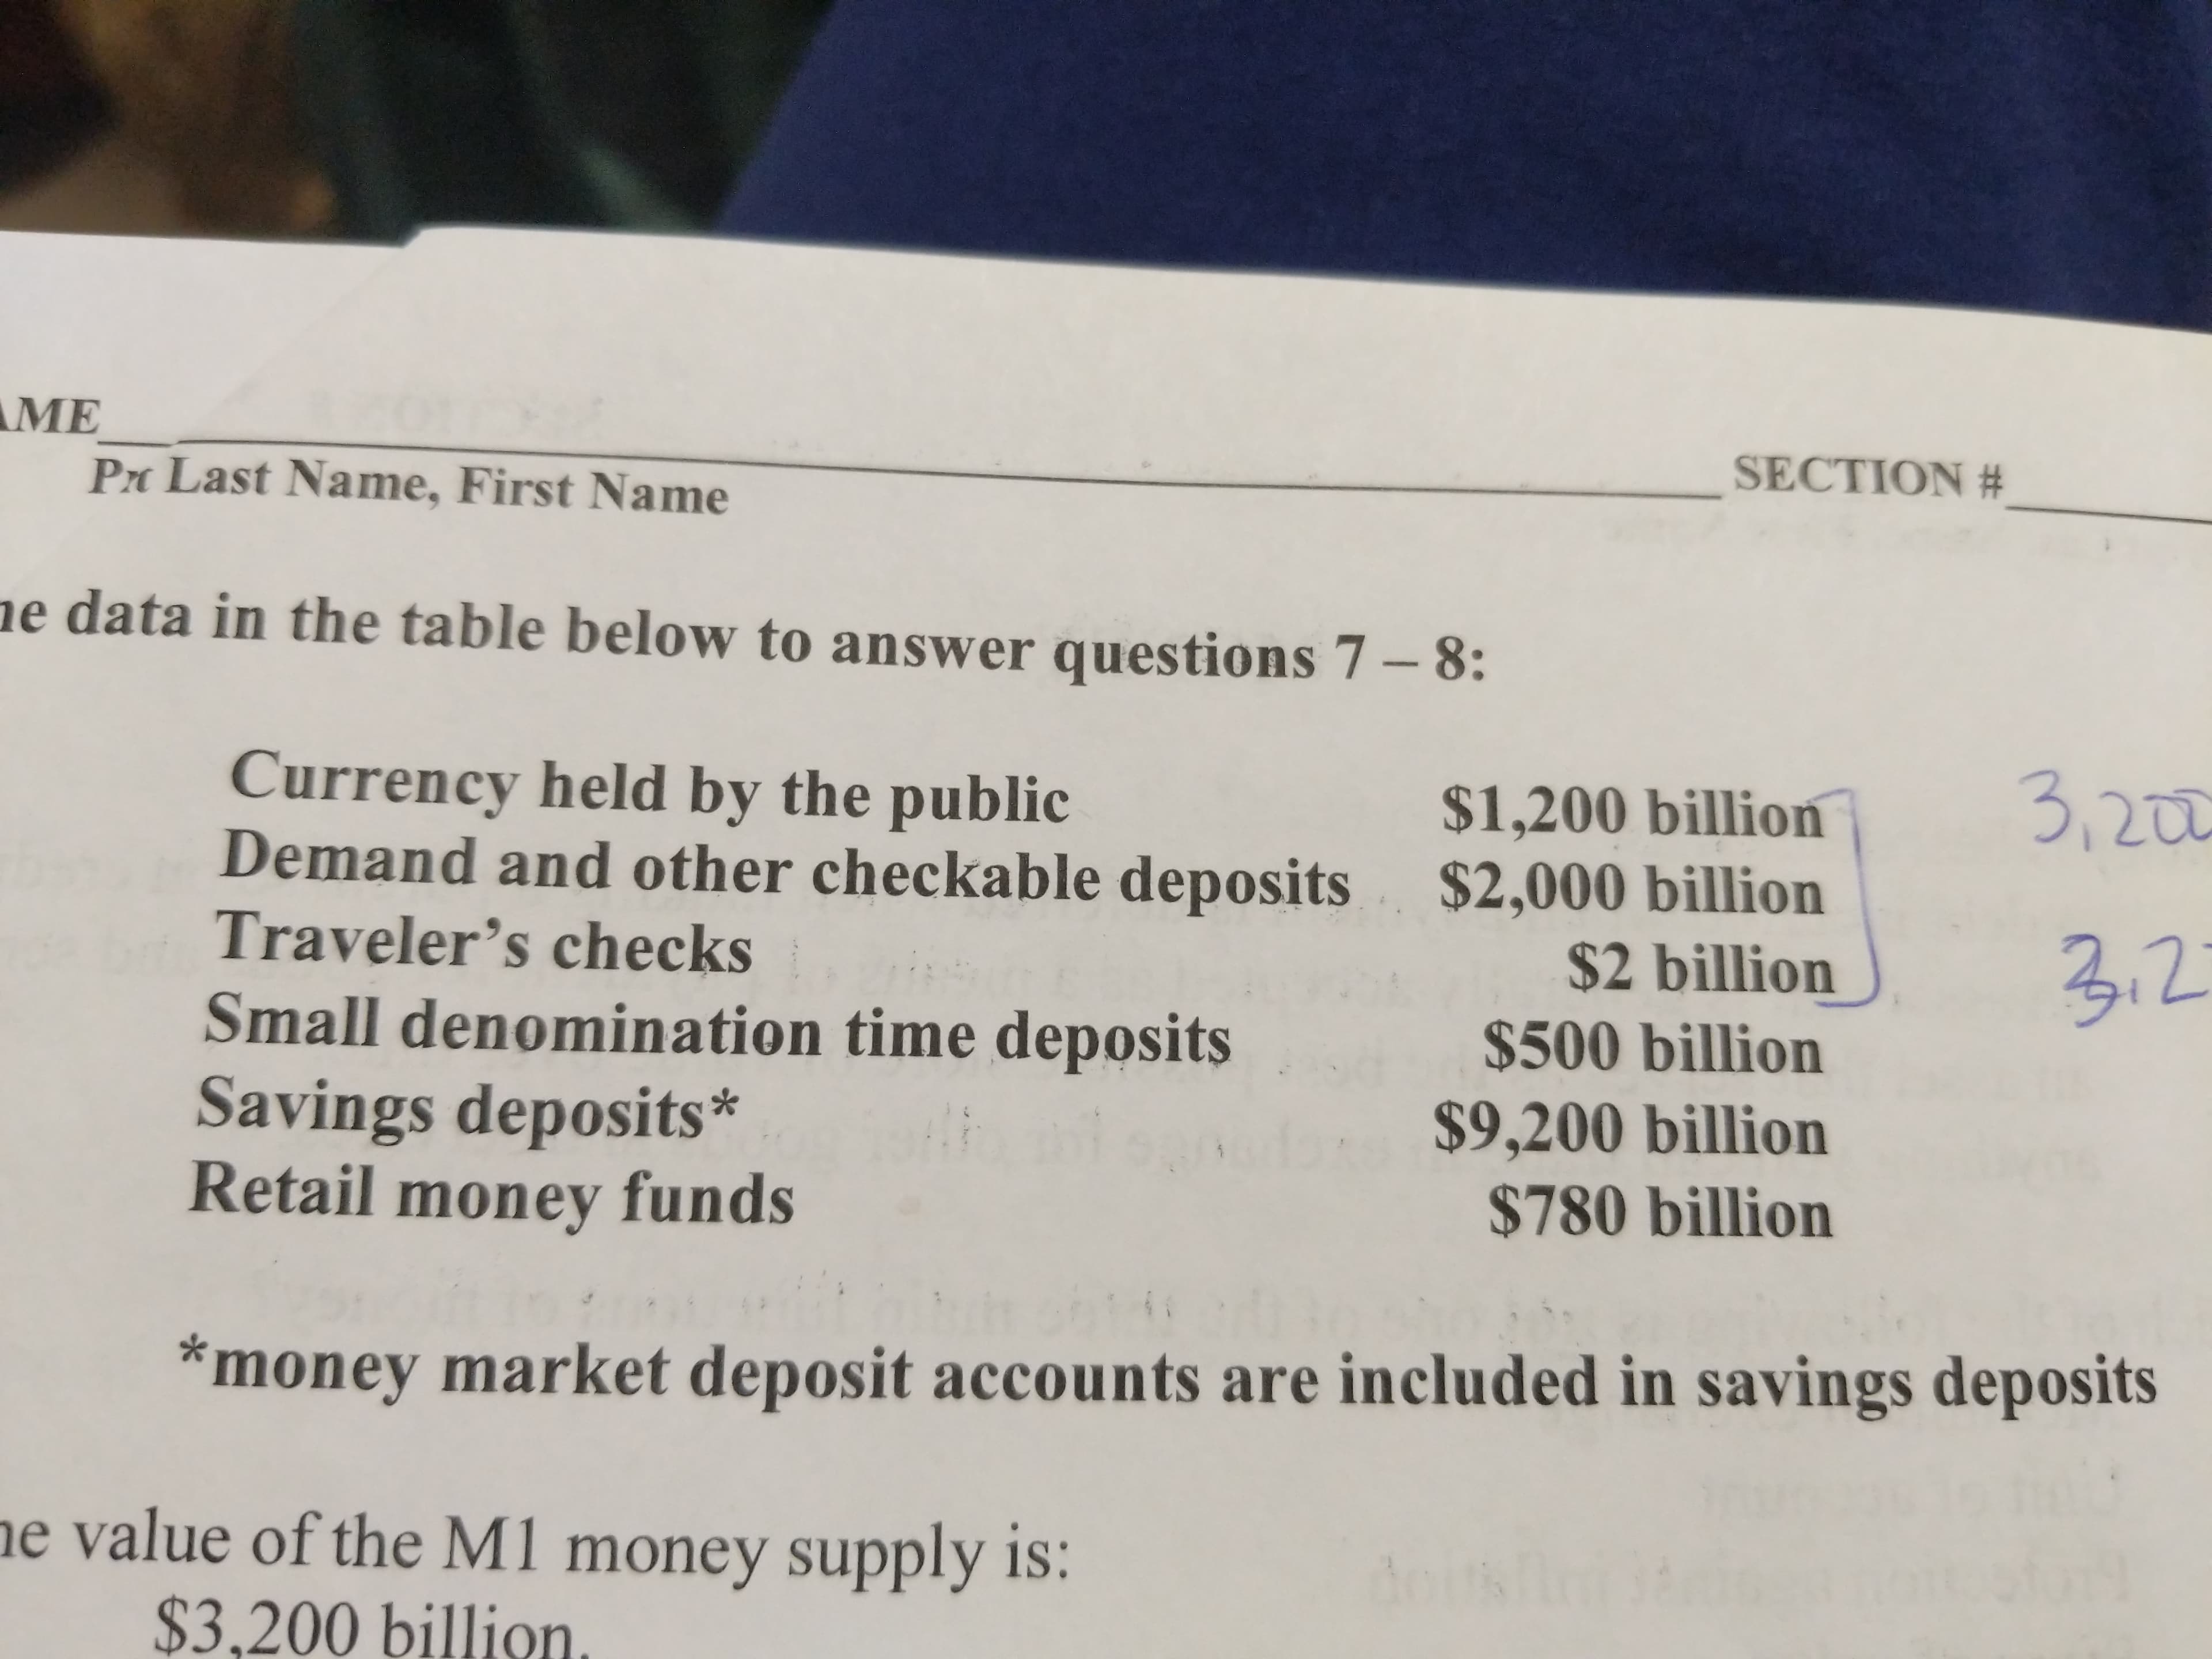 ME
Pr Last Name, First Name
SECTION #
e data in the table below to answer questions 7-8:
Currency held by the public
Demand and other checkable deposits
Traveler's checks
3,20
$1,200 billion
$2,000 billion
3.2
$2 billion
Small denomination time deposits
Savings deposits*
Retail money funds
$500 billion
$9,200 billion
$780 billion
*money market deposit accounts are included in savings deposits
e value of the Ml money supply is:
$3,200 billion.
